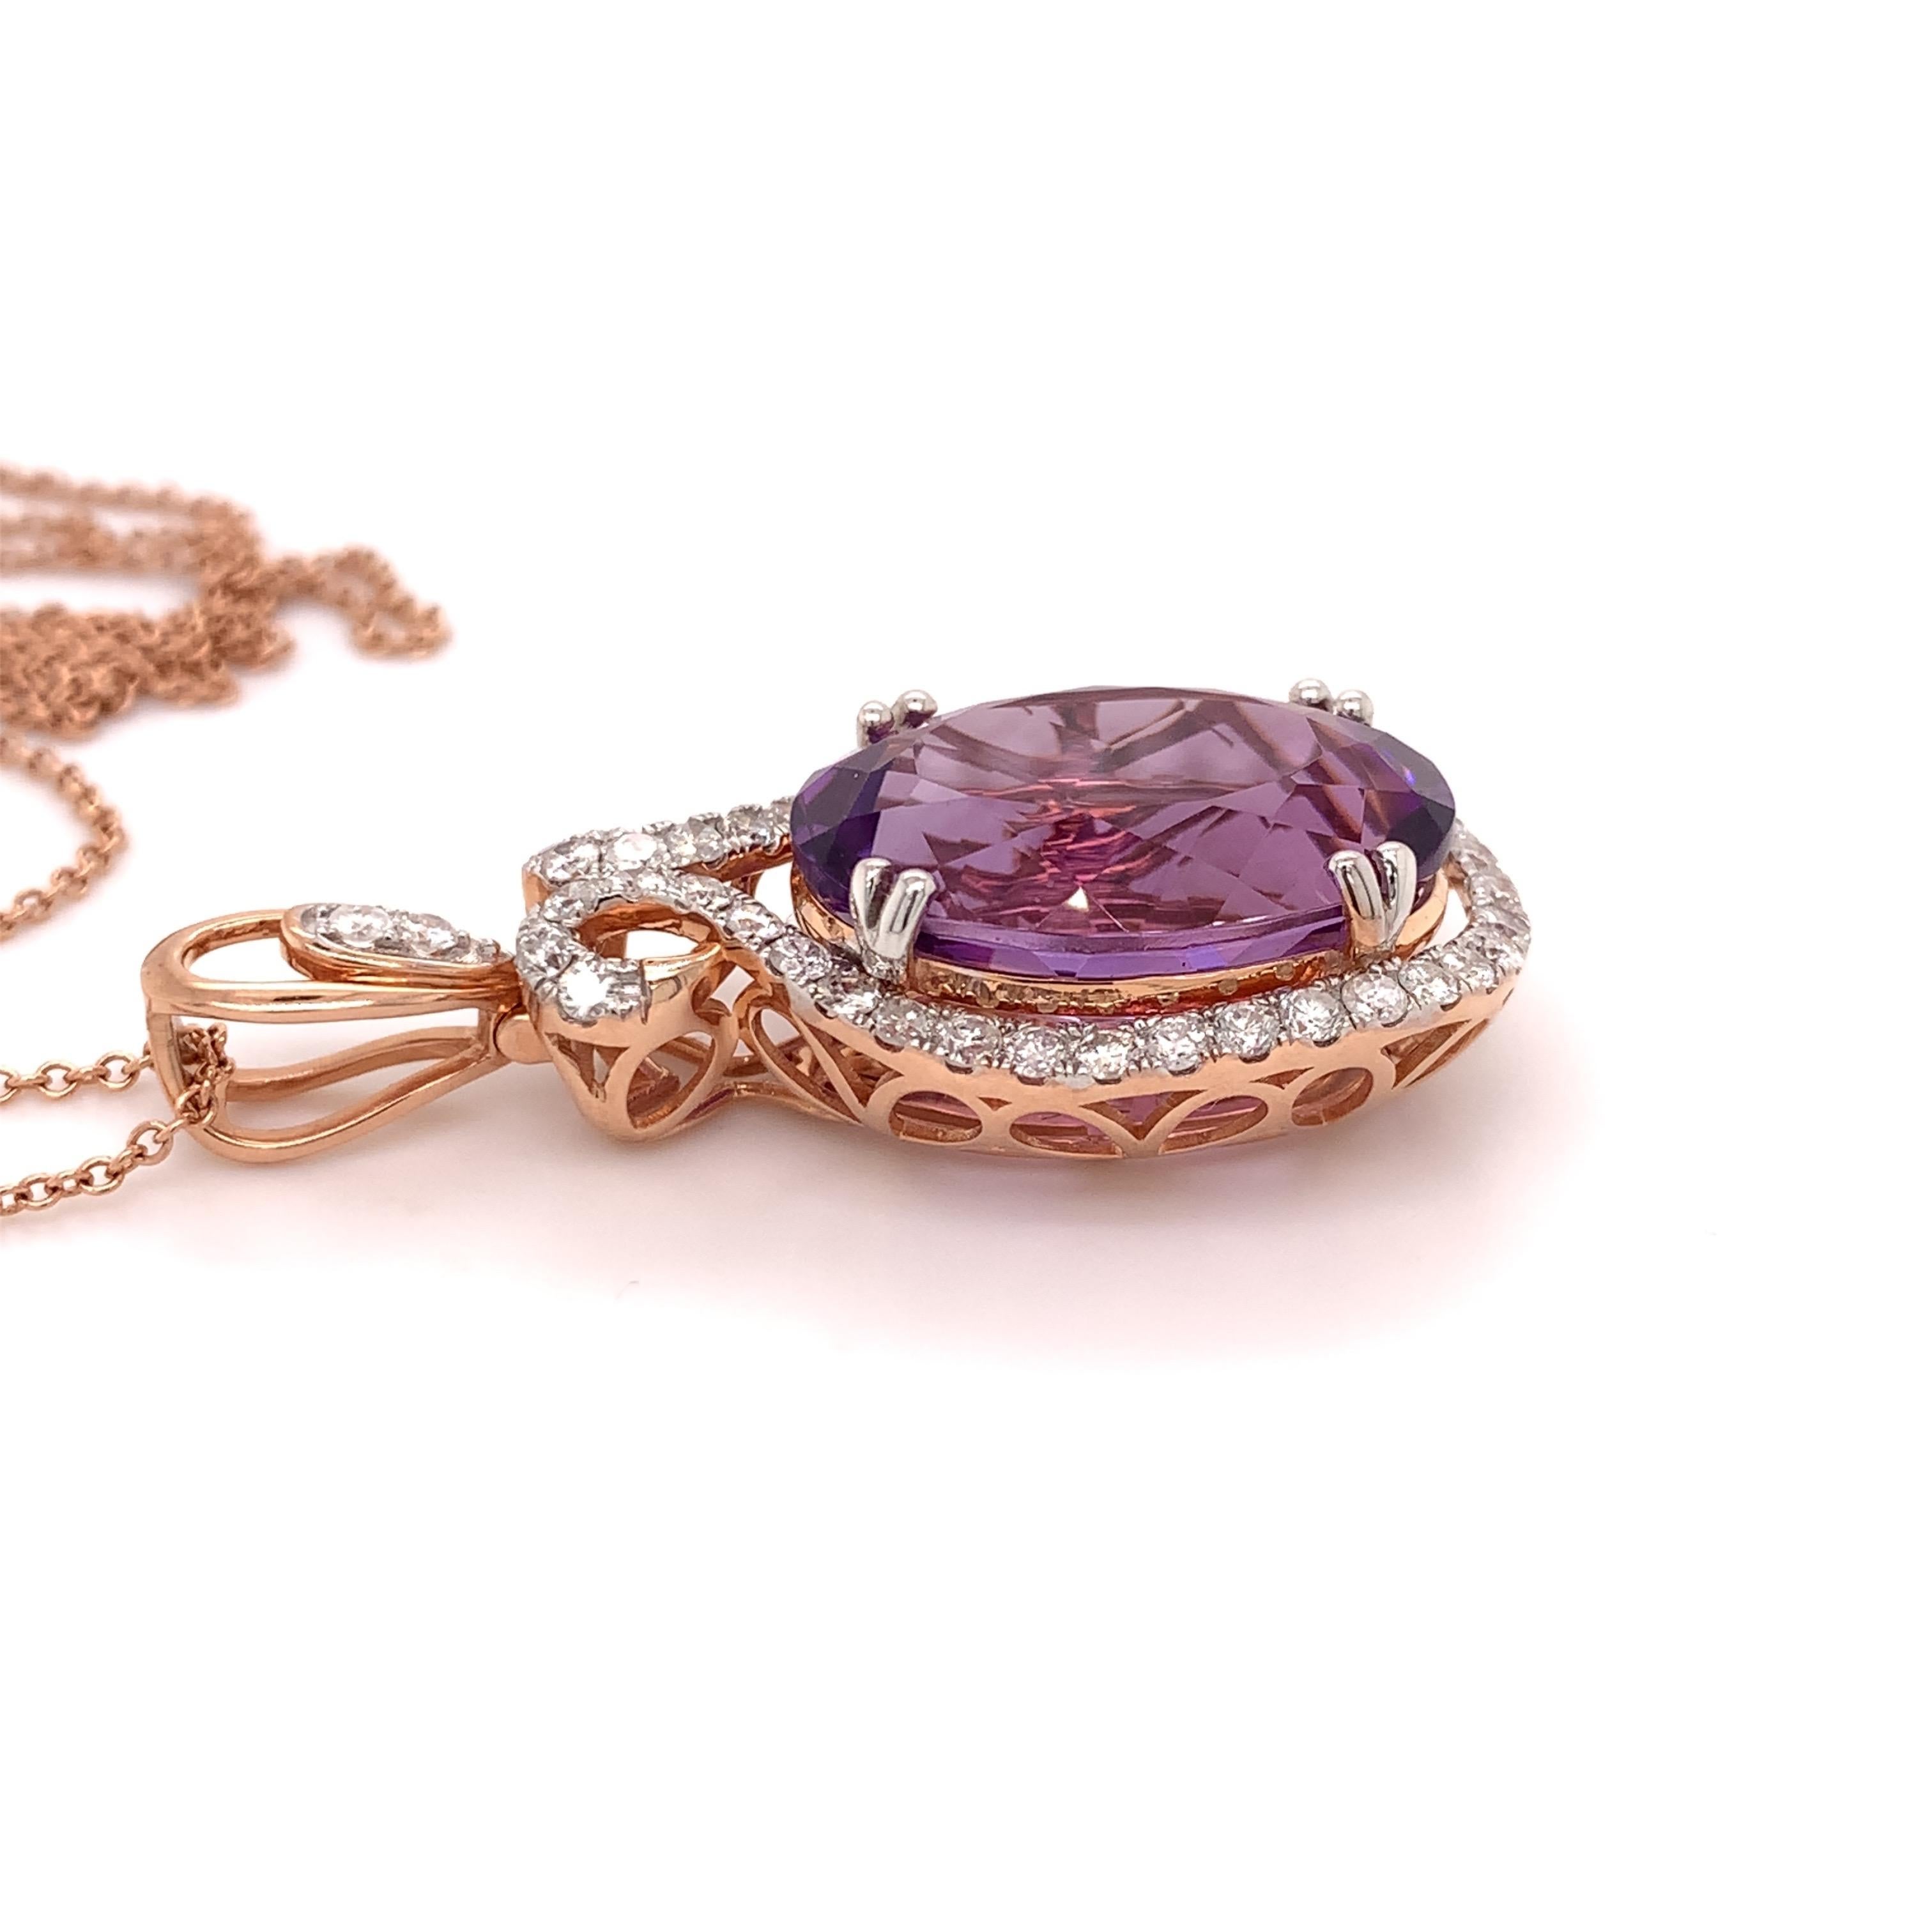 Radiant amethyst diamond pendant. High brilliance, transparent, violet purple oval faceted natural 16.16 carats amethyst encased in a basket with 8 bead prongs, accented with round brilliant cut diamonds. Handcrafted design set in 14 karats rose